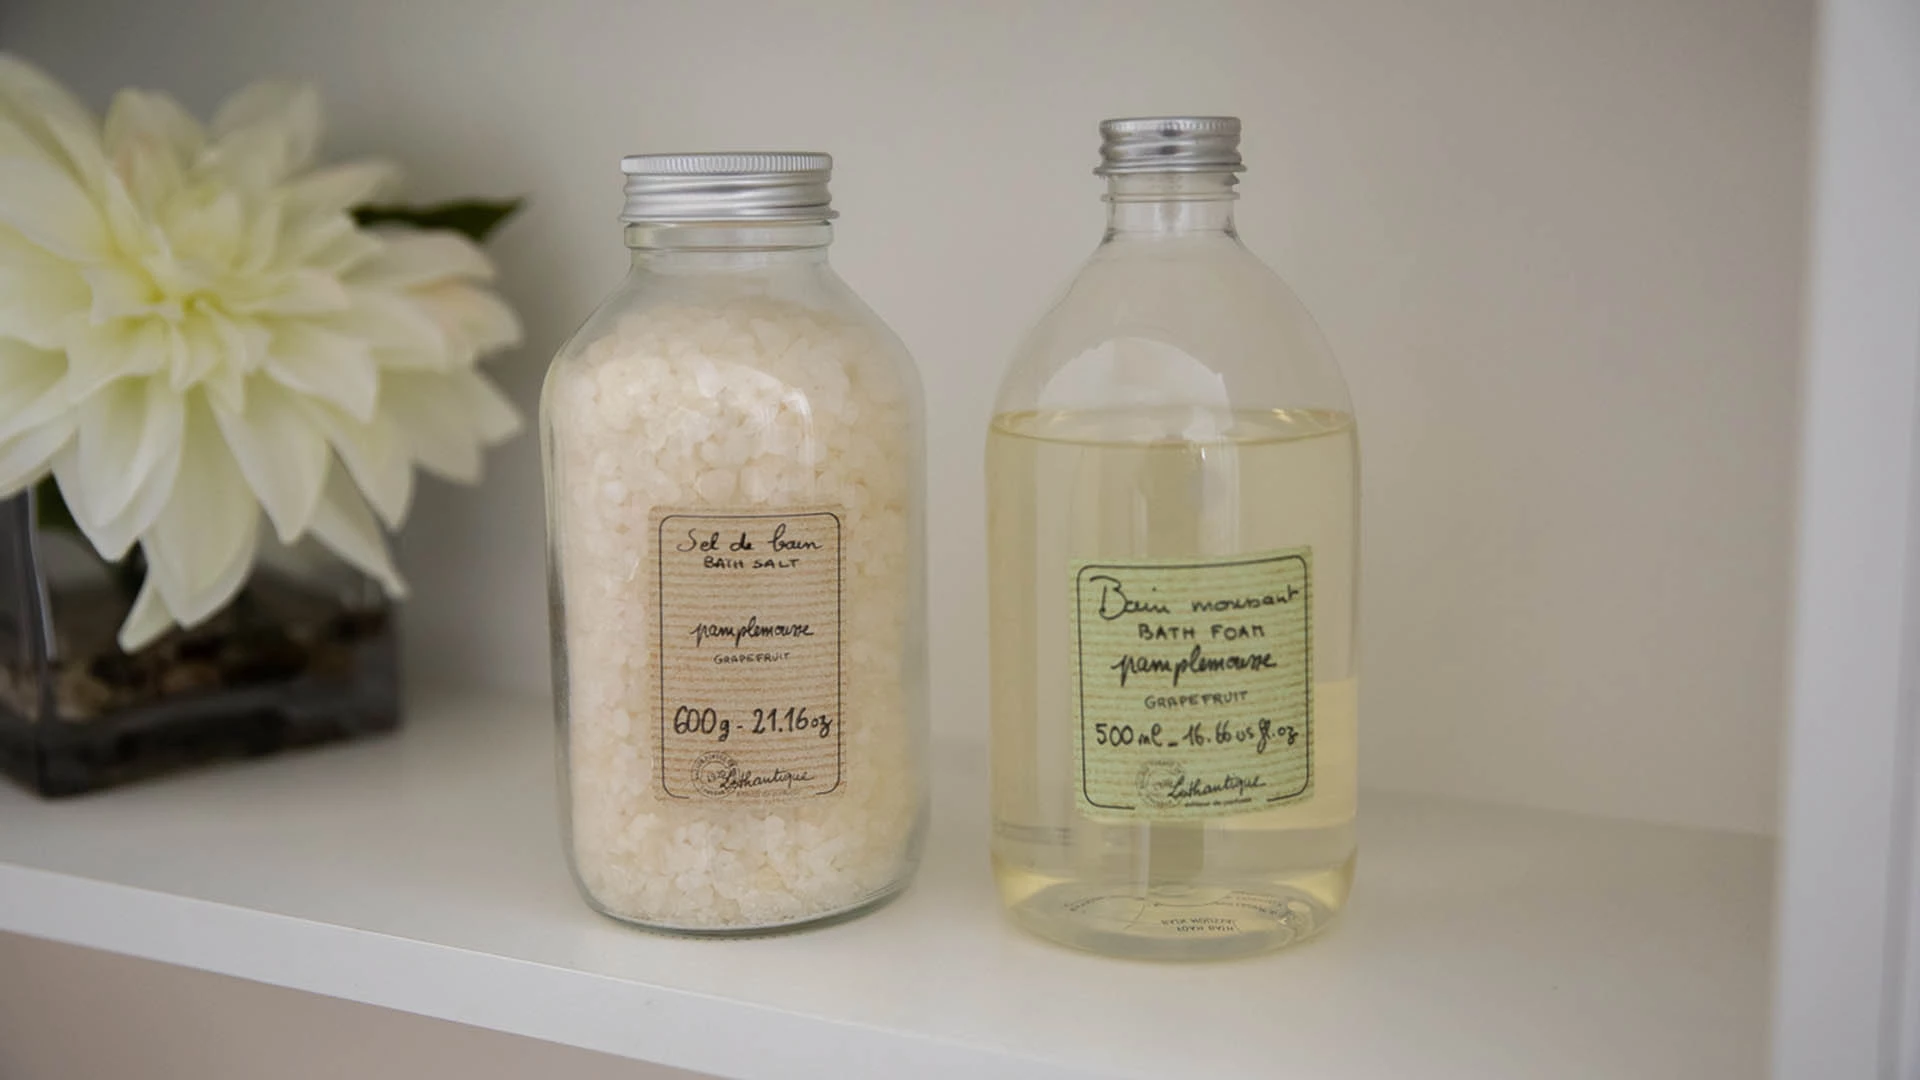 Glass containers of bath salts and bath foam